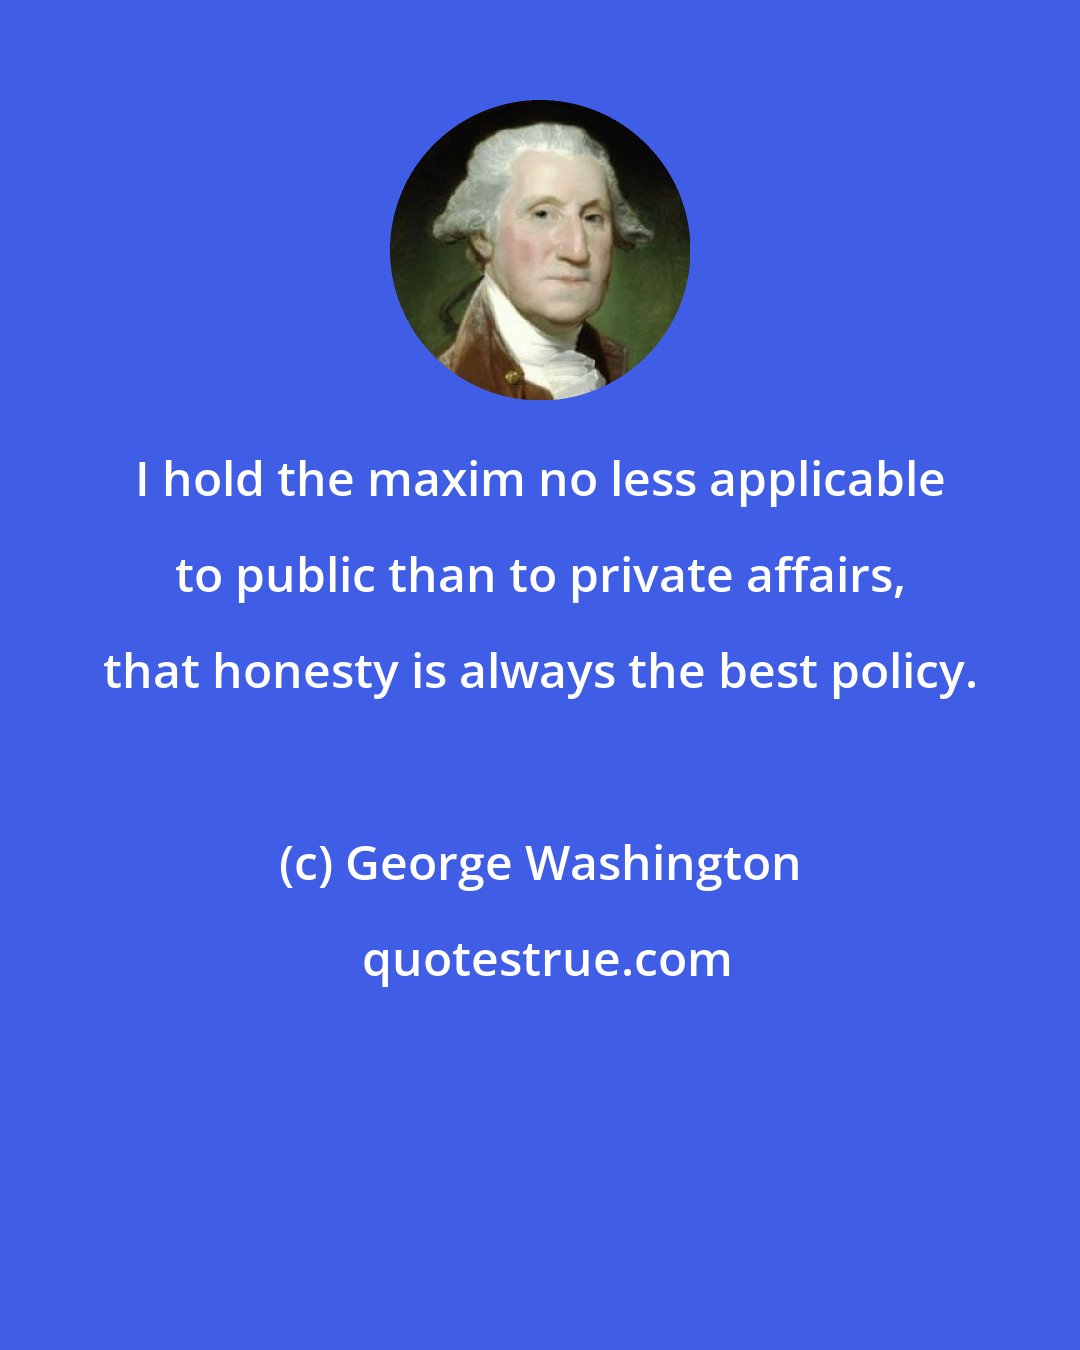 George Washington: I hold the maxim no less applicable to public than to private affairs, that honesty is always the best policy.